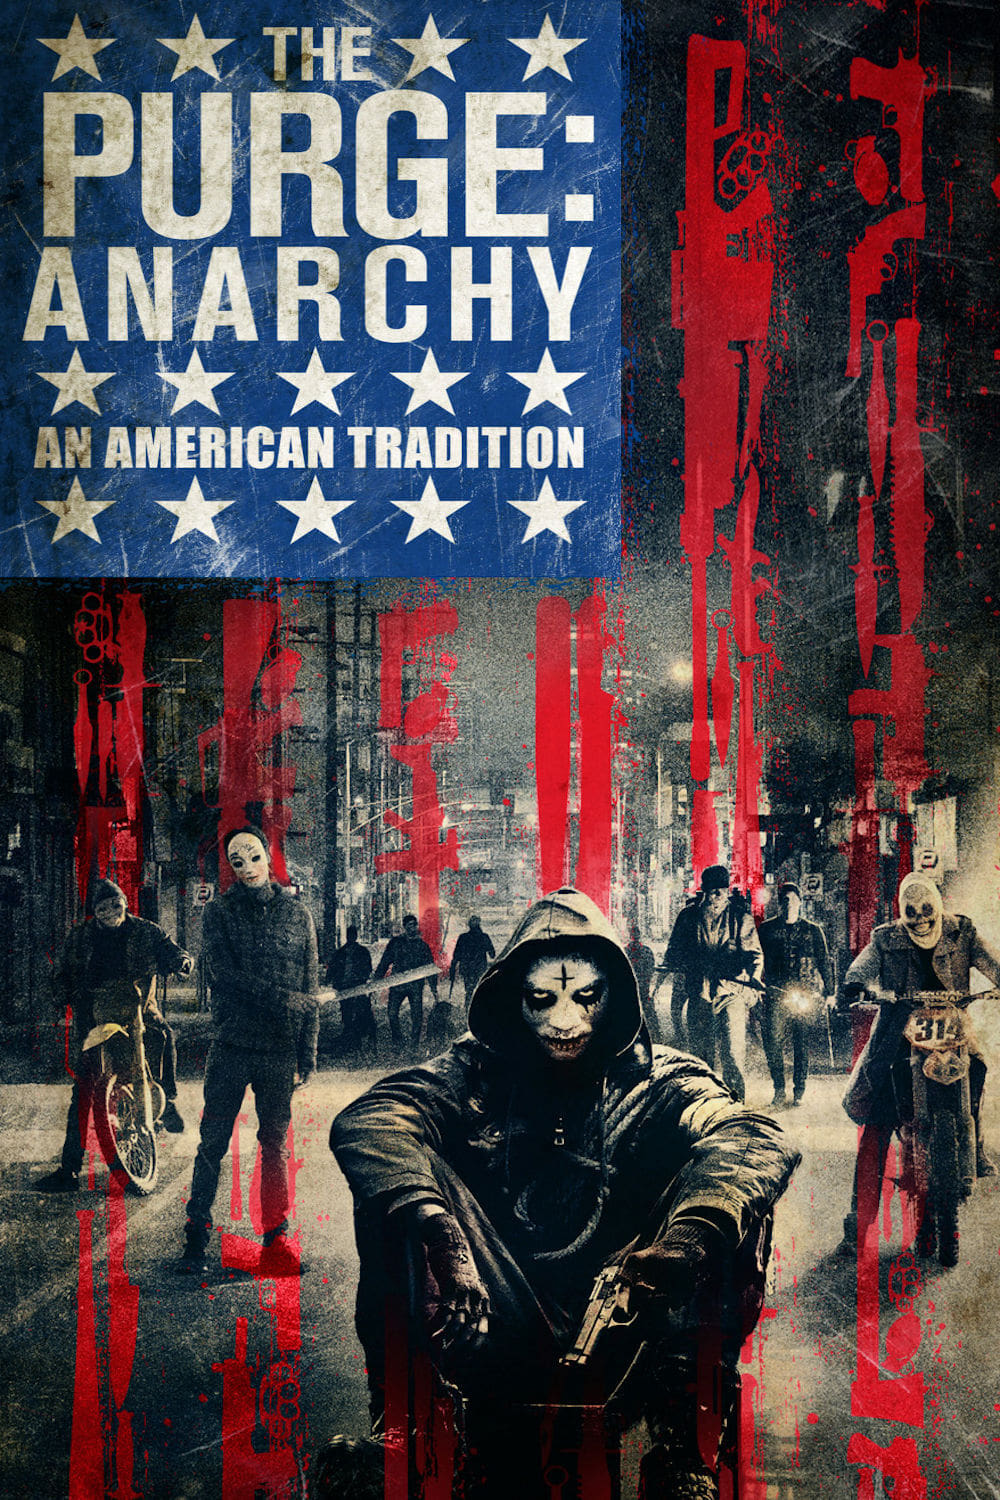 The Purge: Anarchy (2014) Vudu or Movies Anywhere HD redemption only